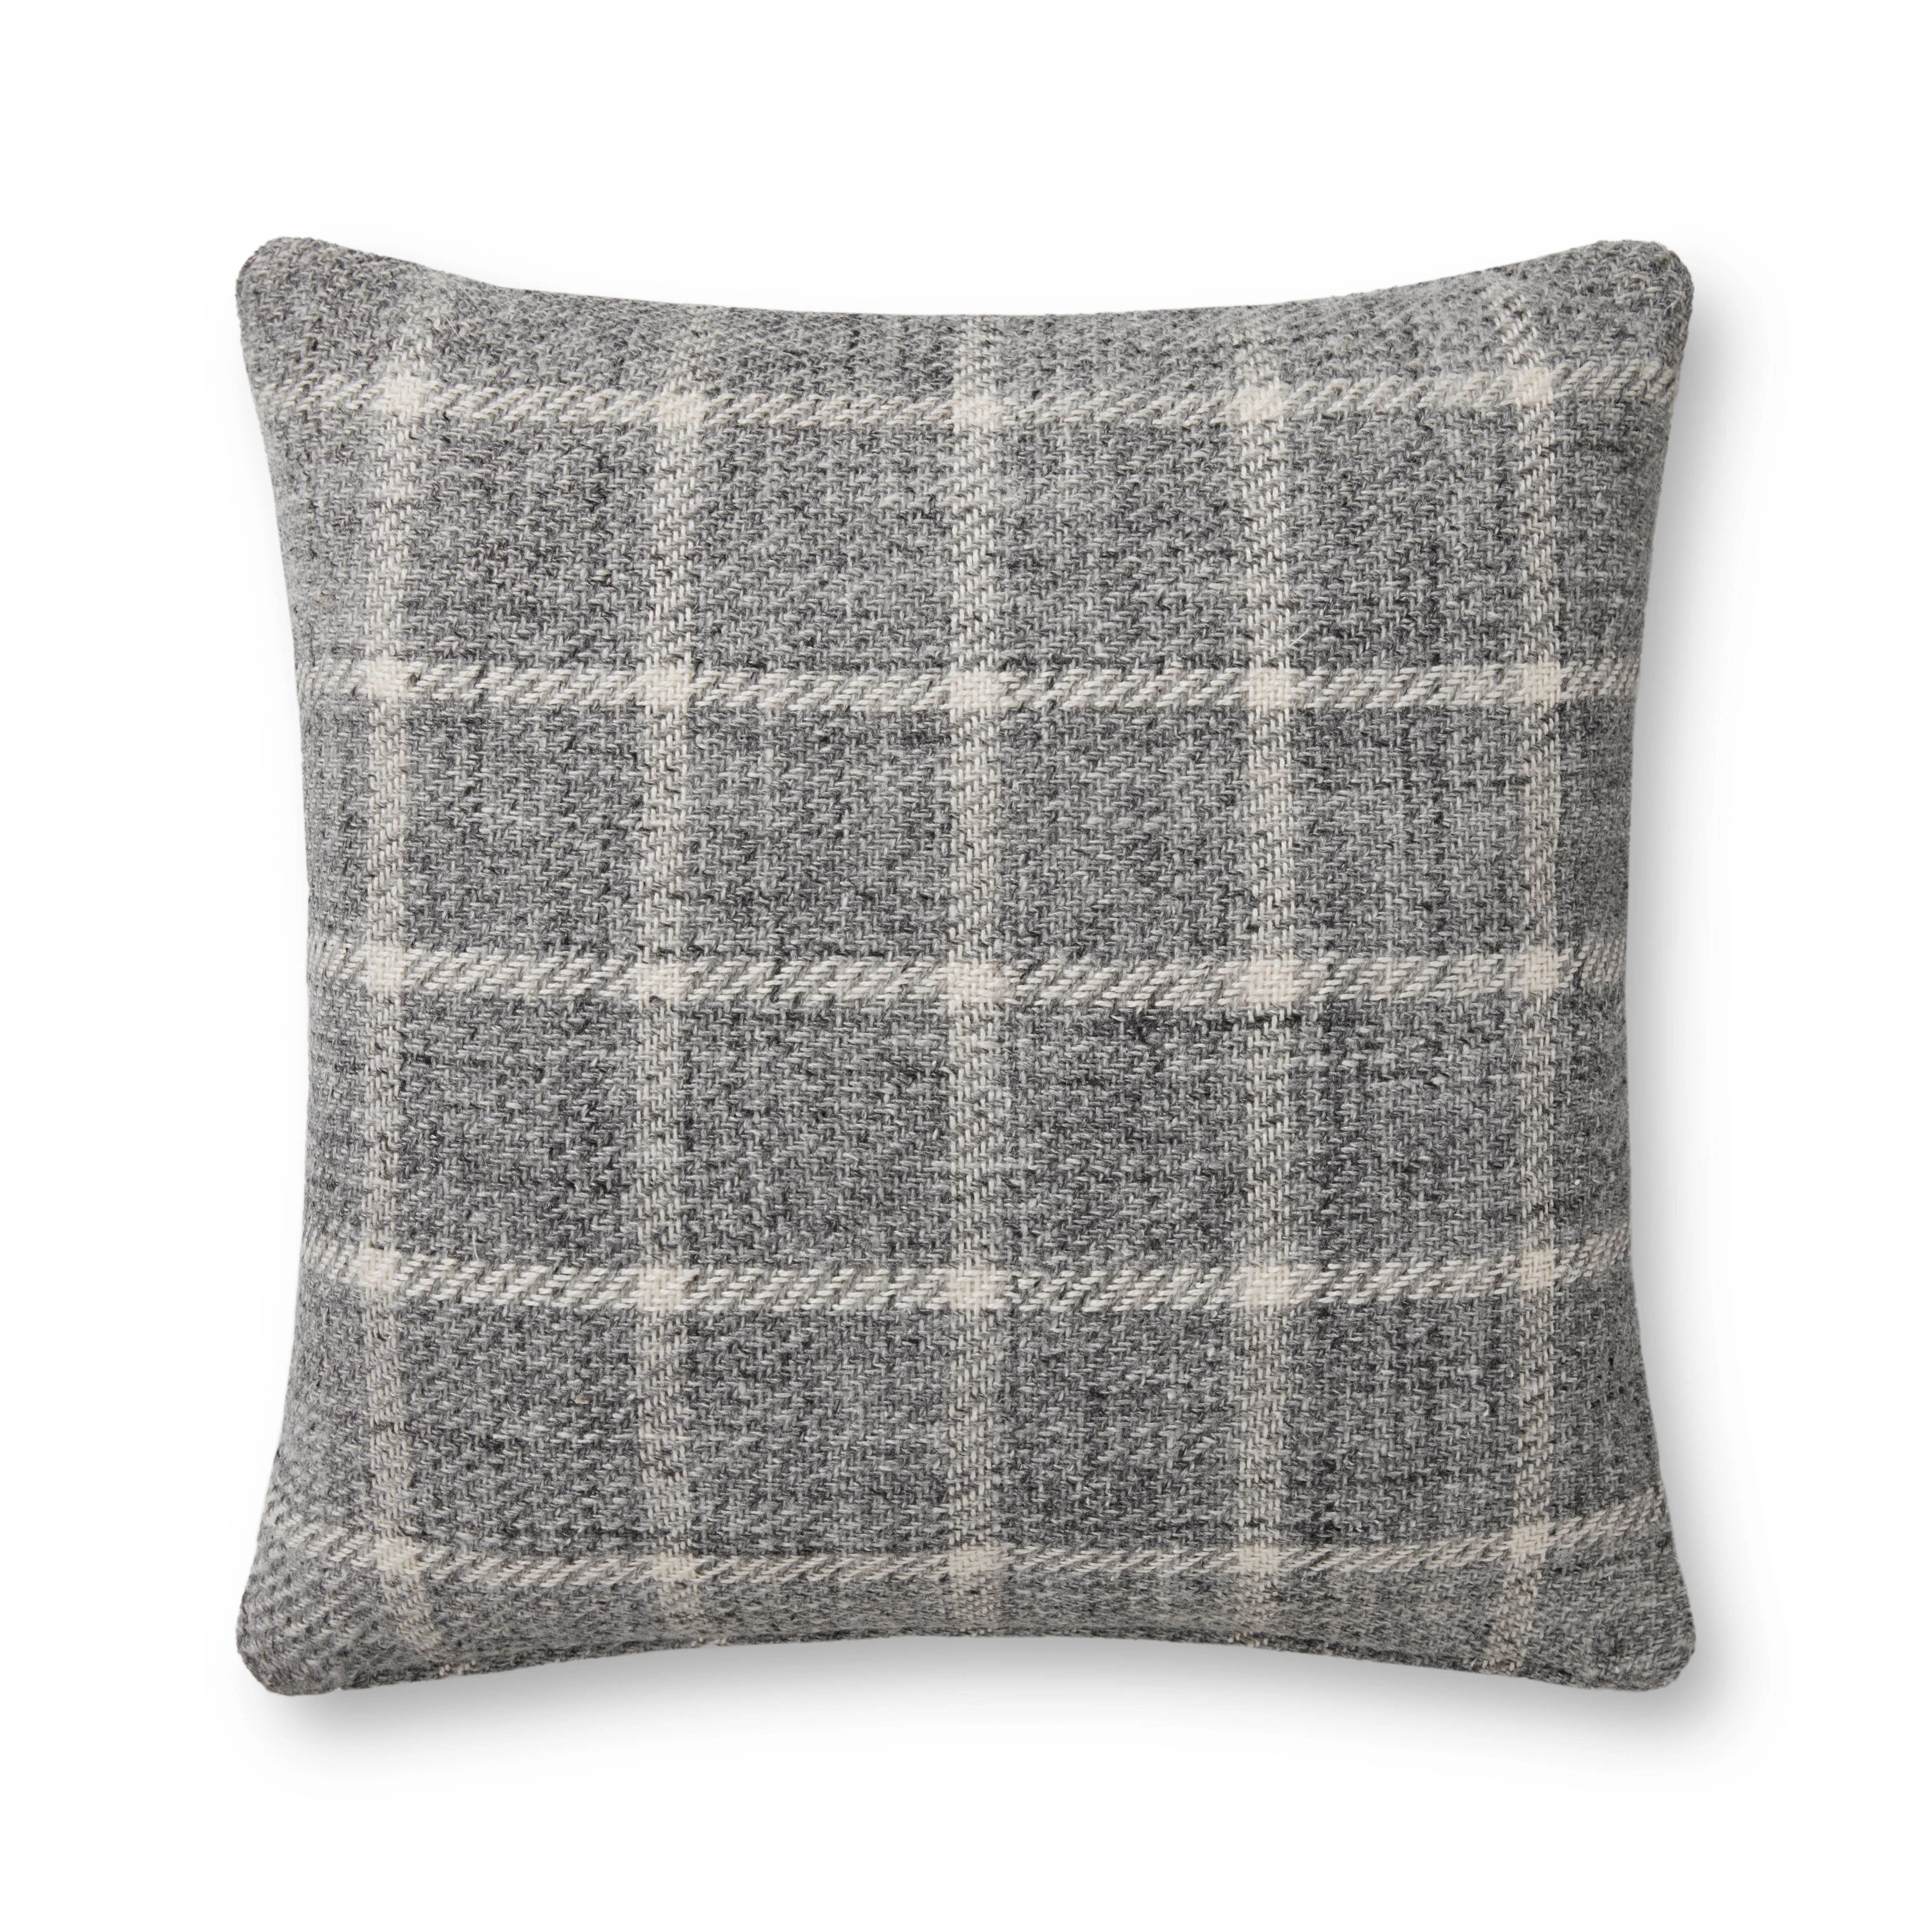 Magnolia Home by Joanna Gaines x Loloi Grey Pillow | Eco Chic Home